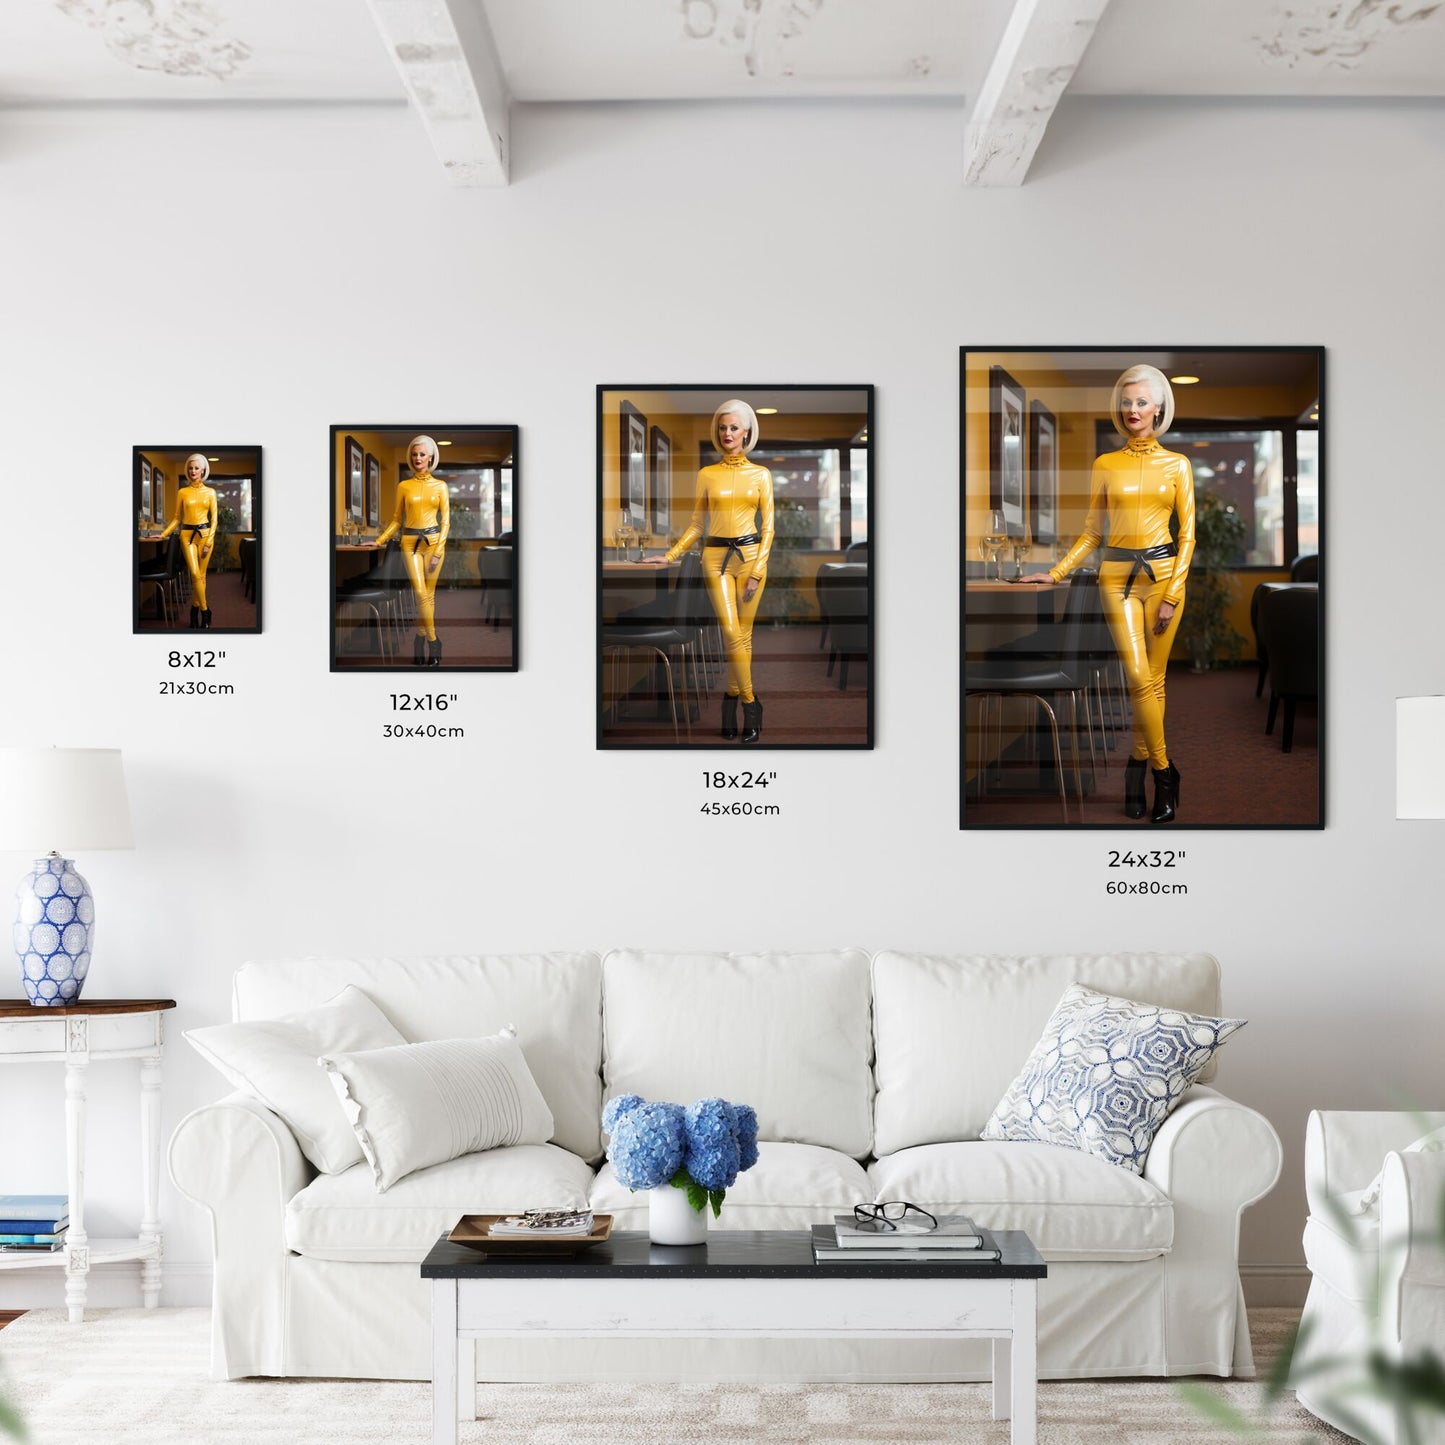 A Poster of beautiful upright standing lady - A Woman In A Yellow Latex Suit Default Title